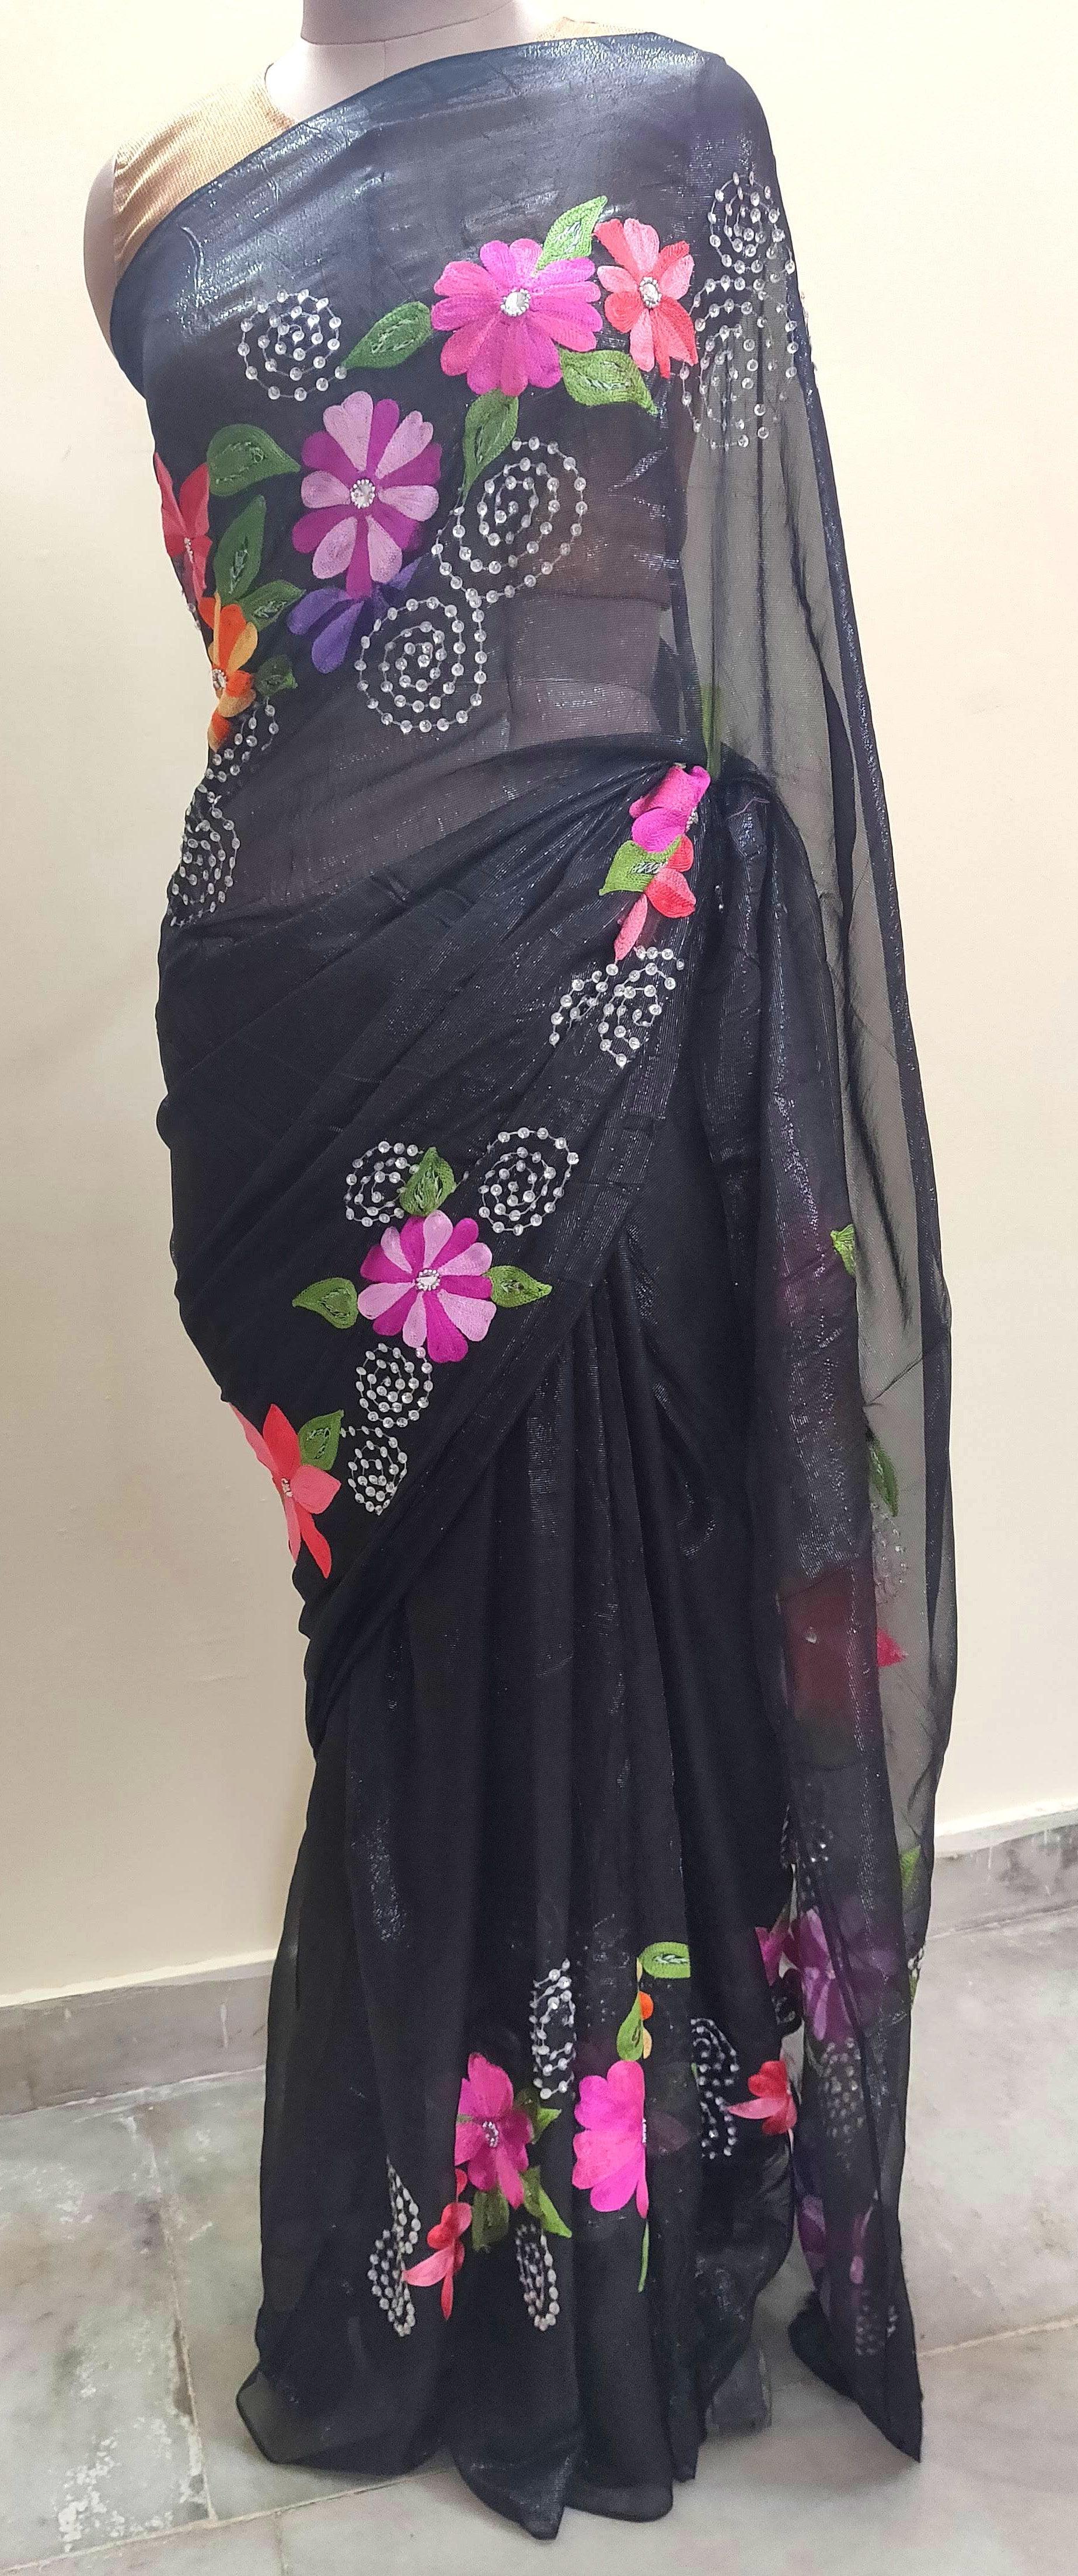 Designer Embroidered Black Shimmer Chiffon Saree SH01 - Ethnic's By Anvi Creations